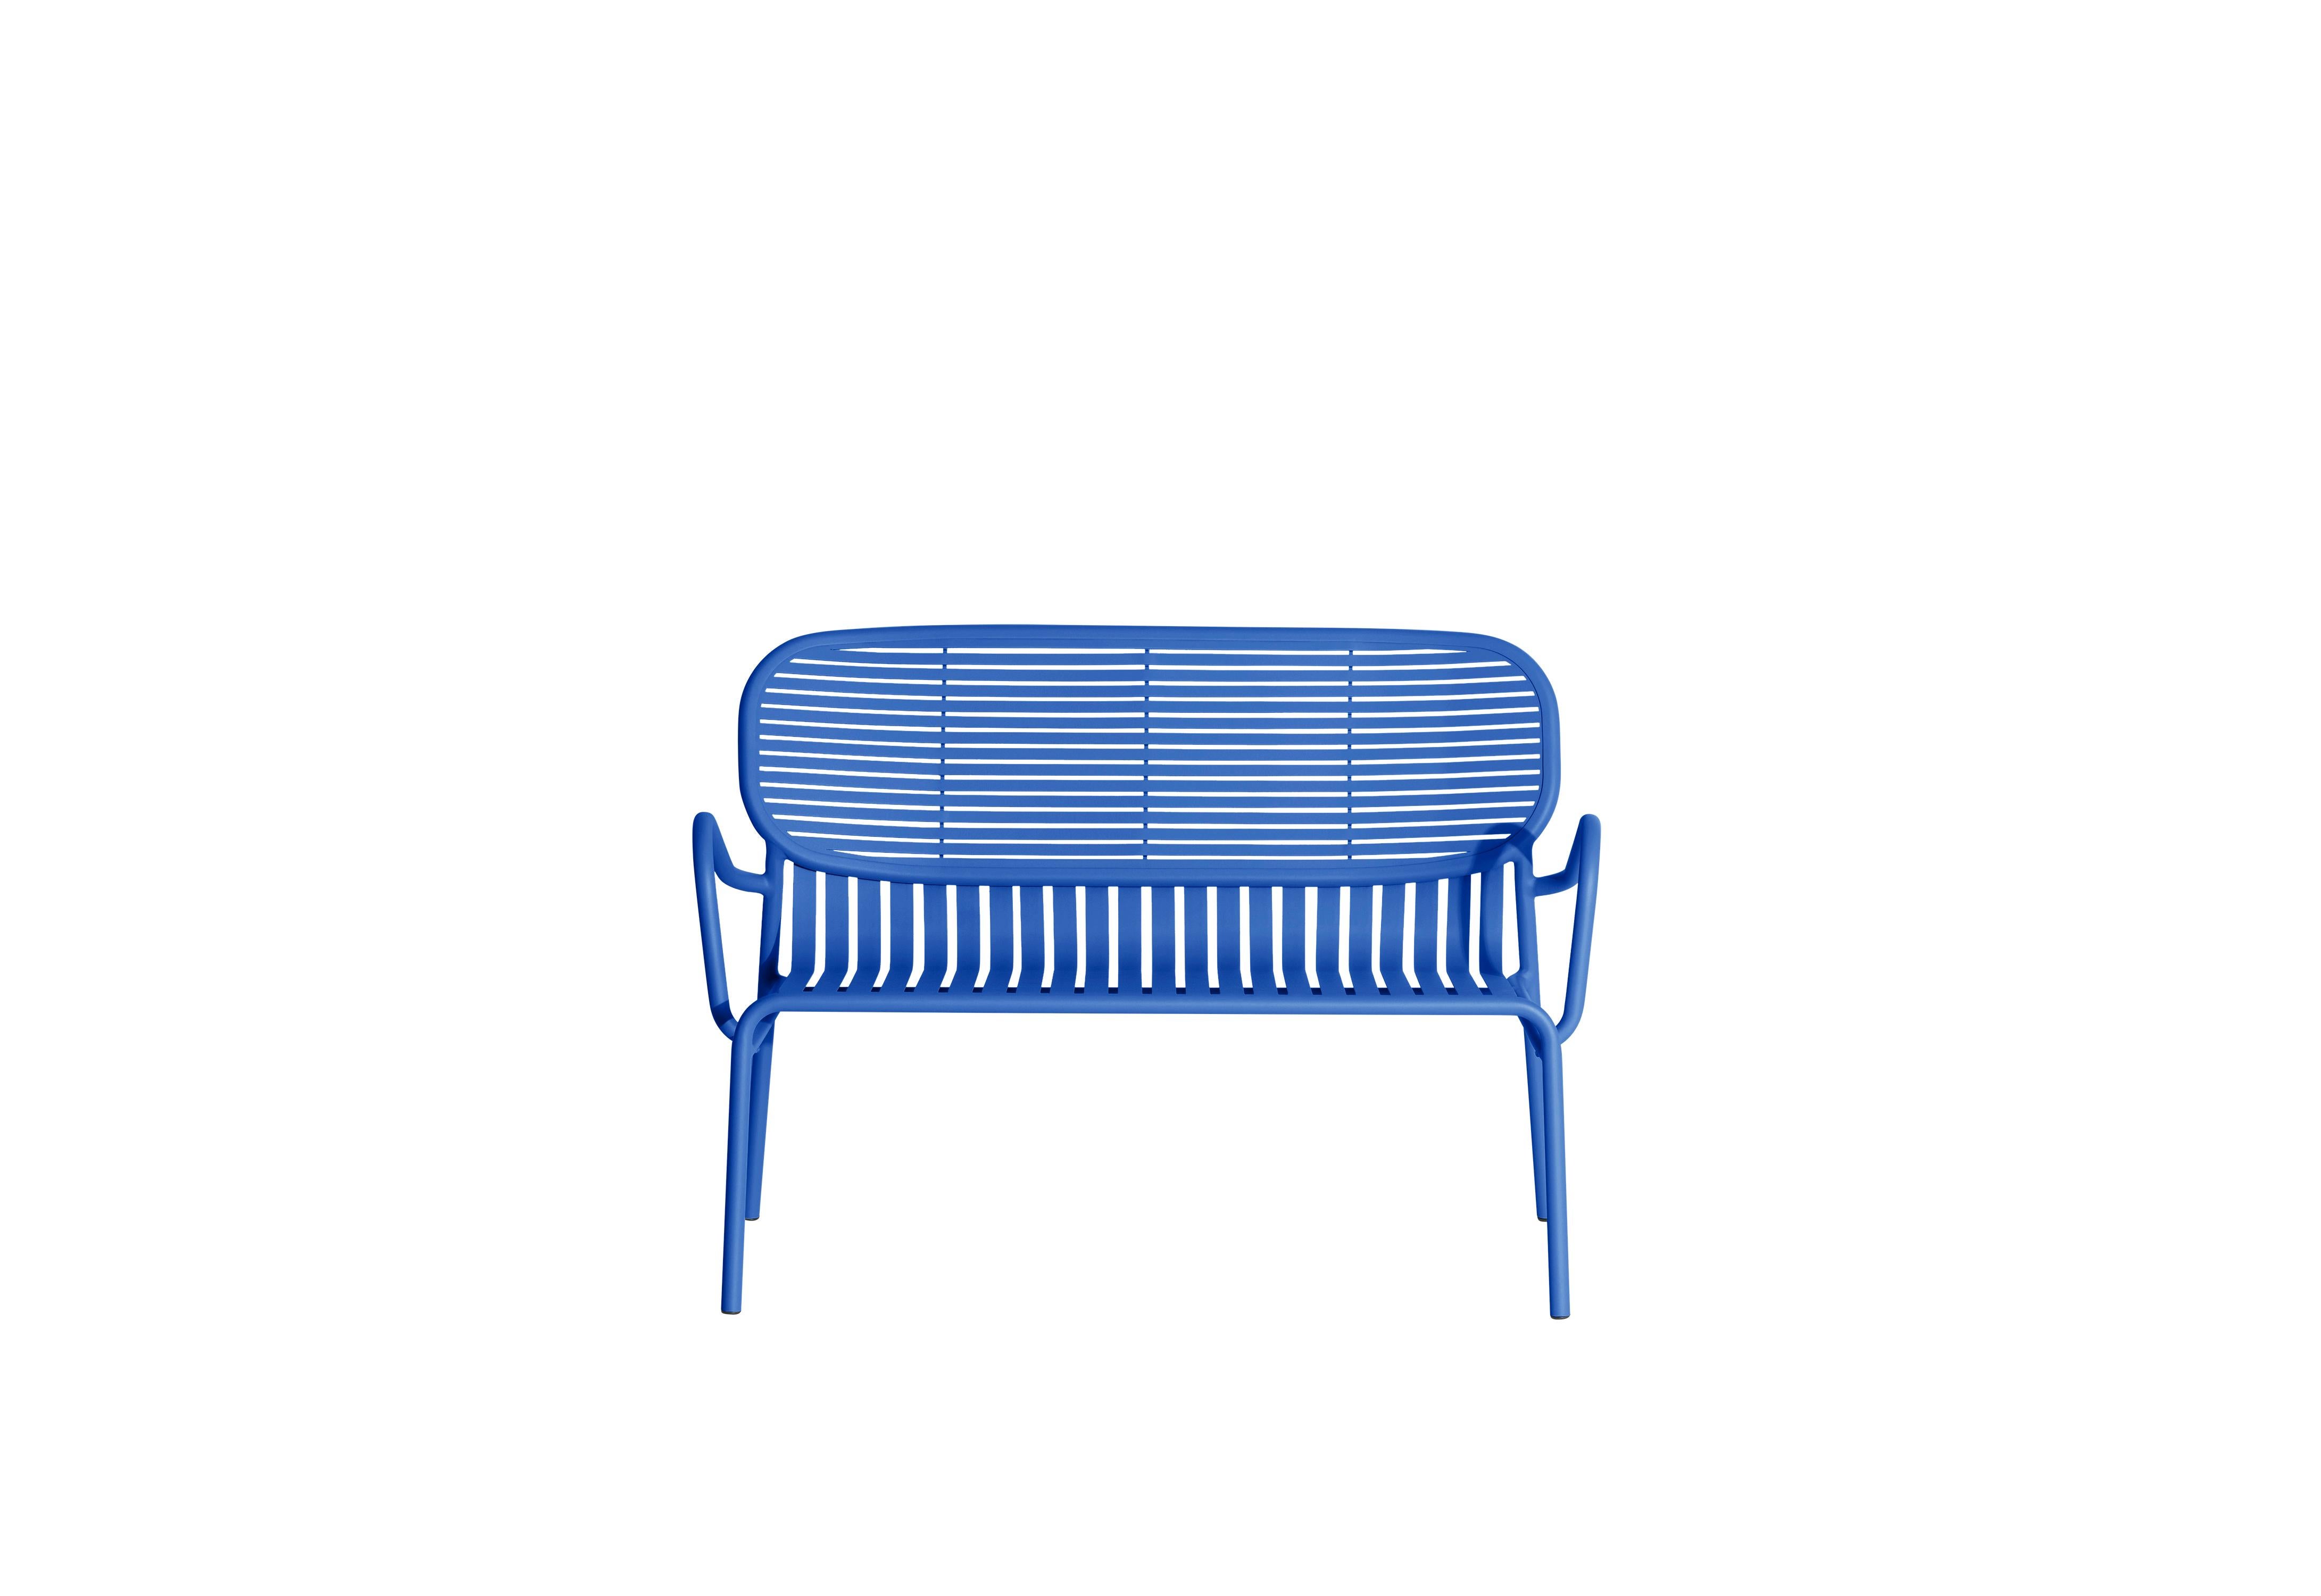 Petite Friture Week-End Sofa in Blue Aluminium by Studio BrichetZiegler, 2017

The week-end collection is a full range of outdoor furniture, in aluminium grained epoxy paint, matt finish, that includes 18 functions and 8 colours for the retail